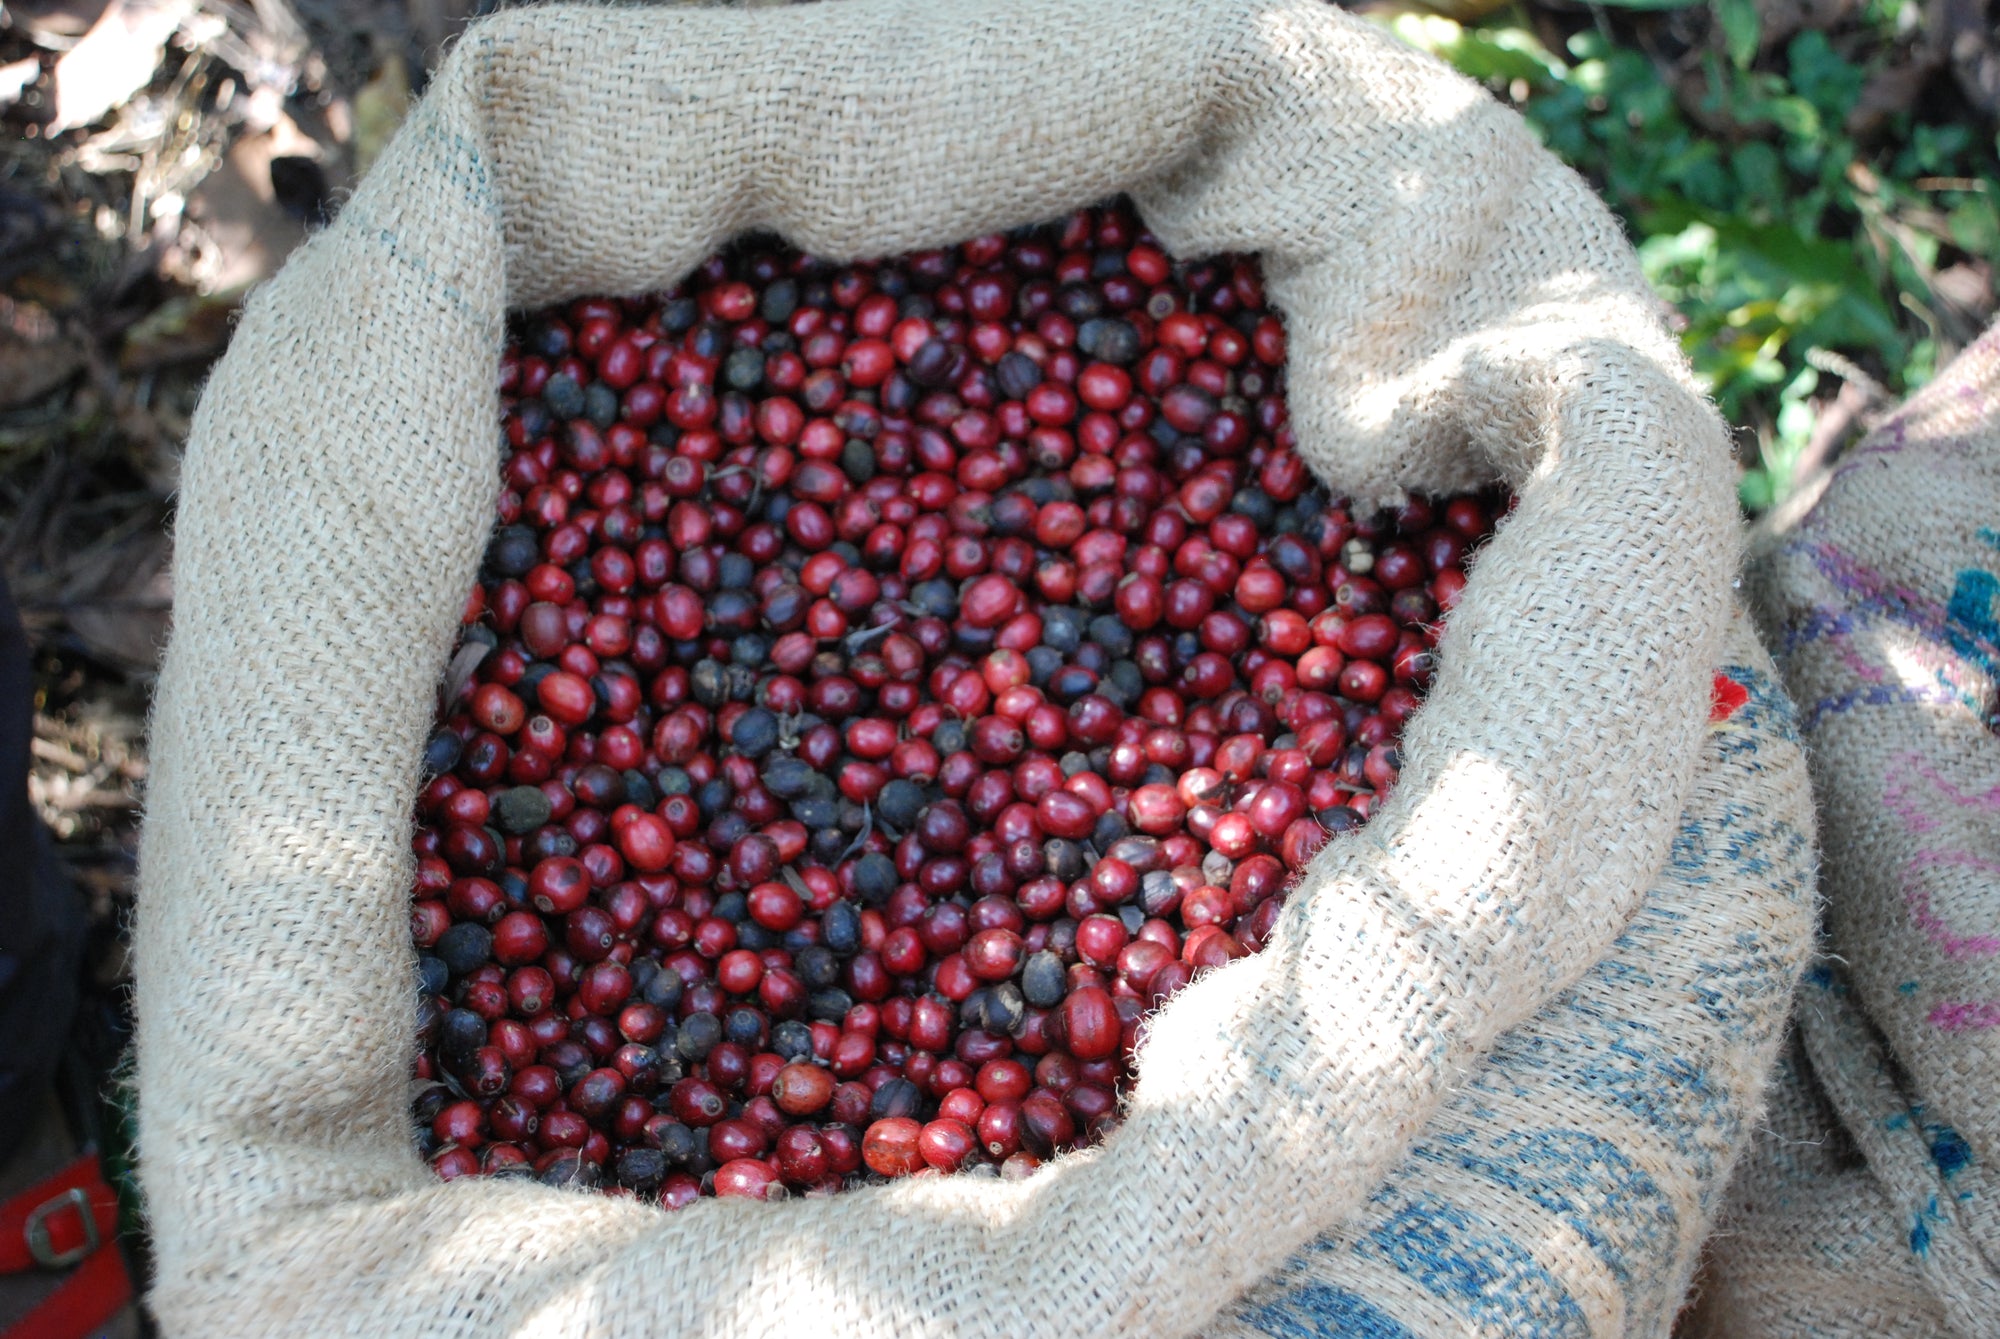 Different Types of Coffee Beans